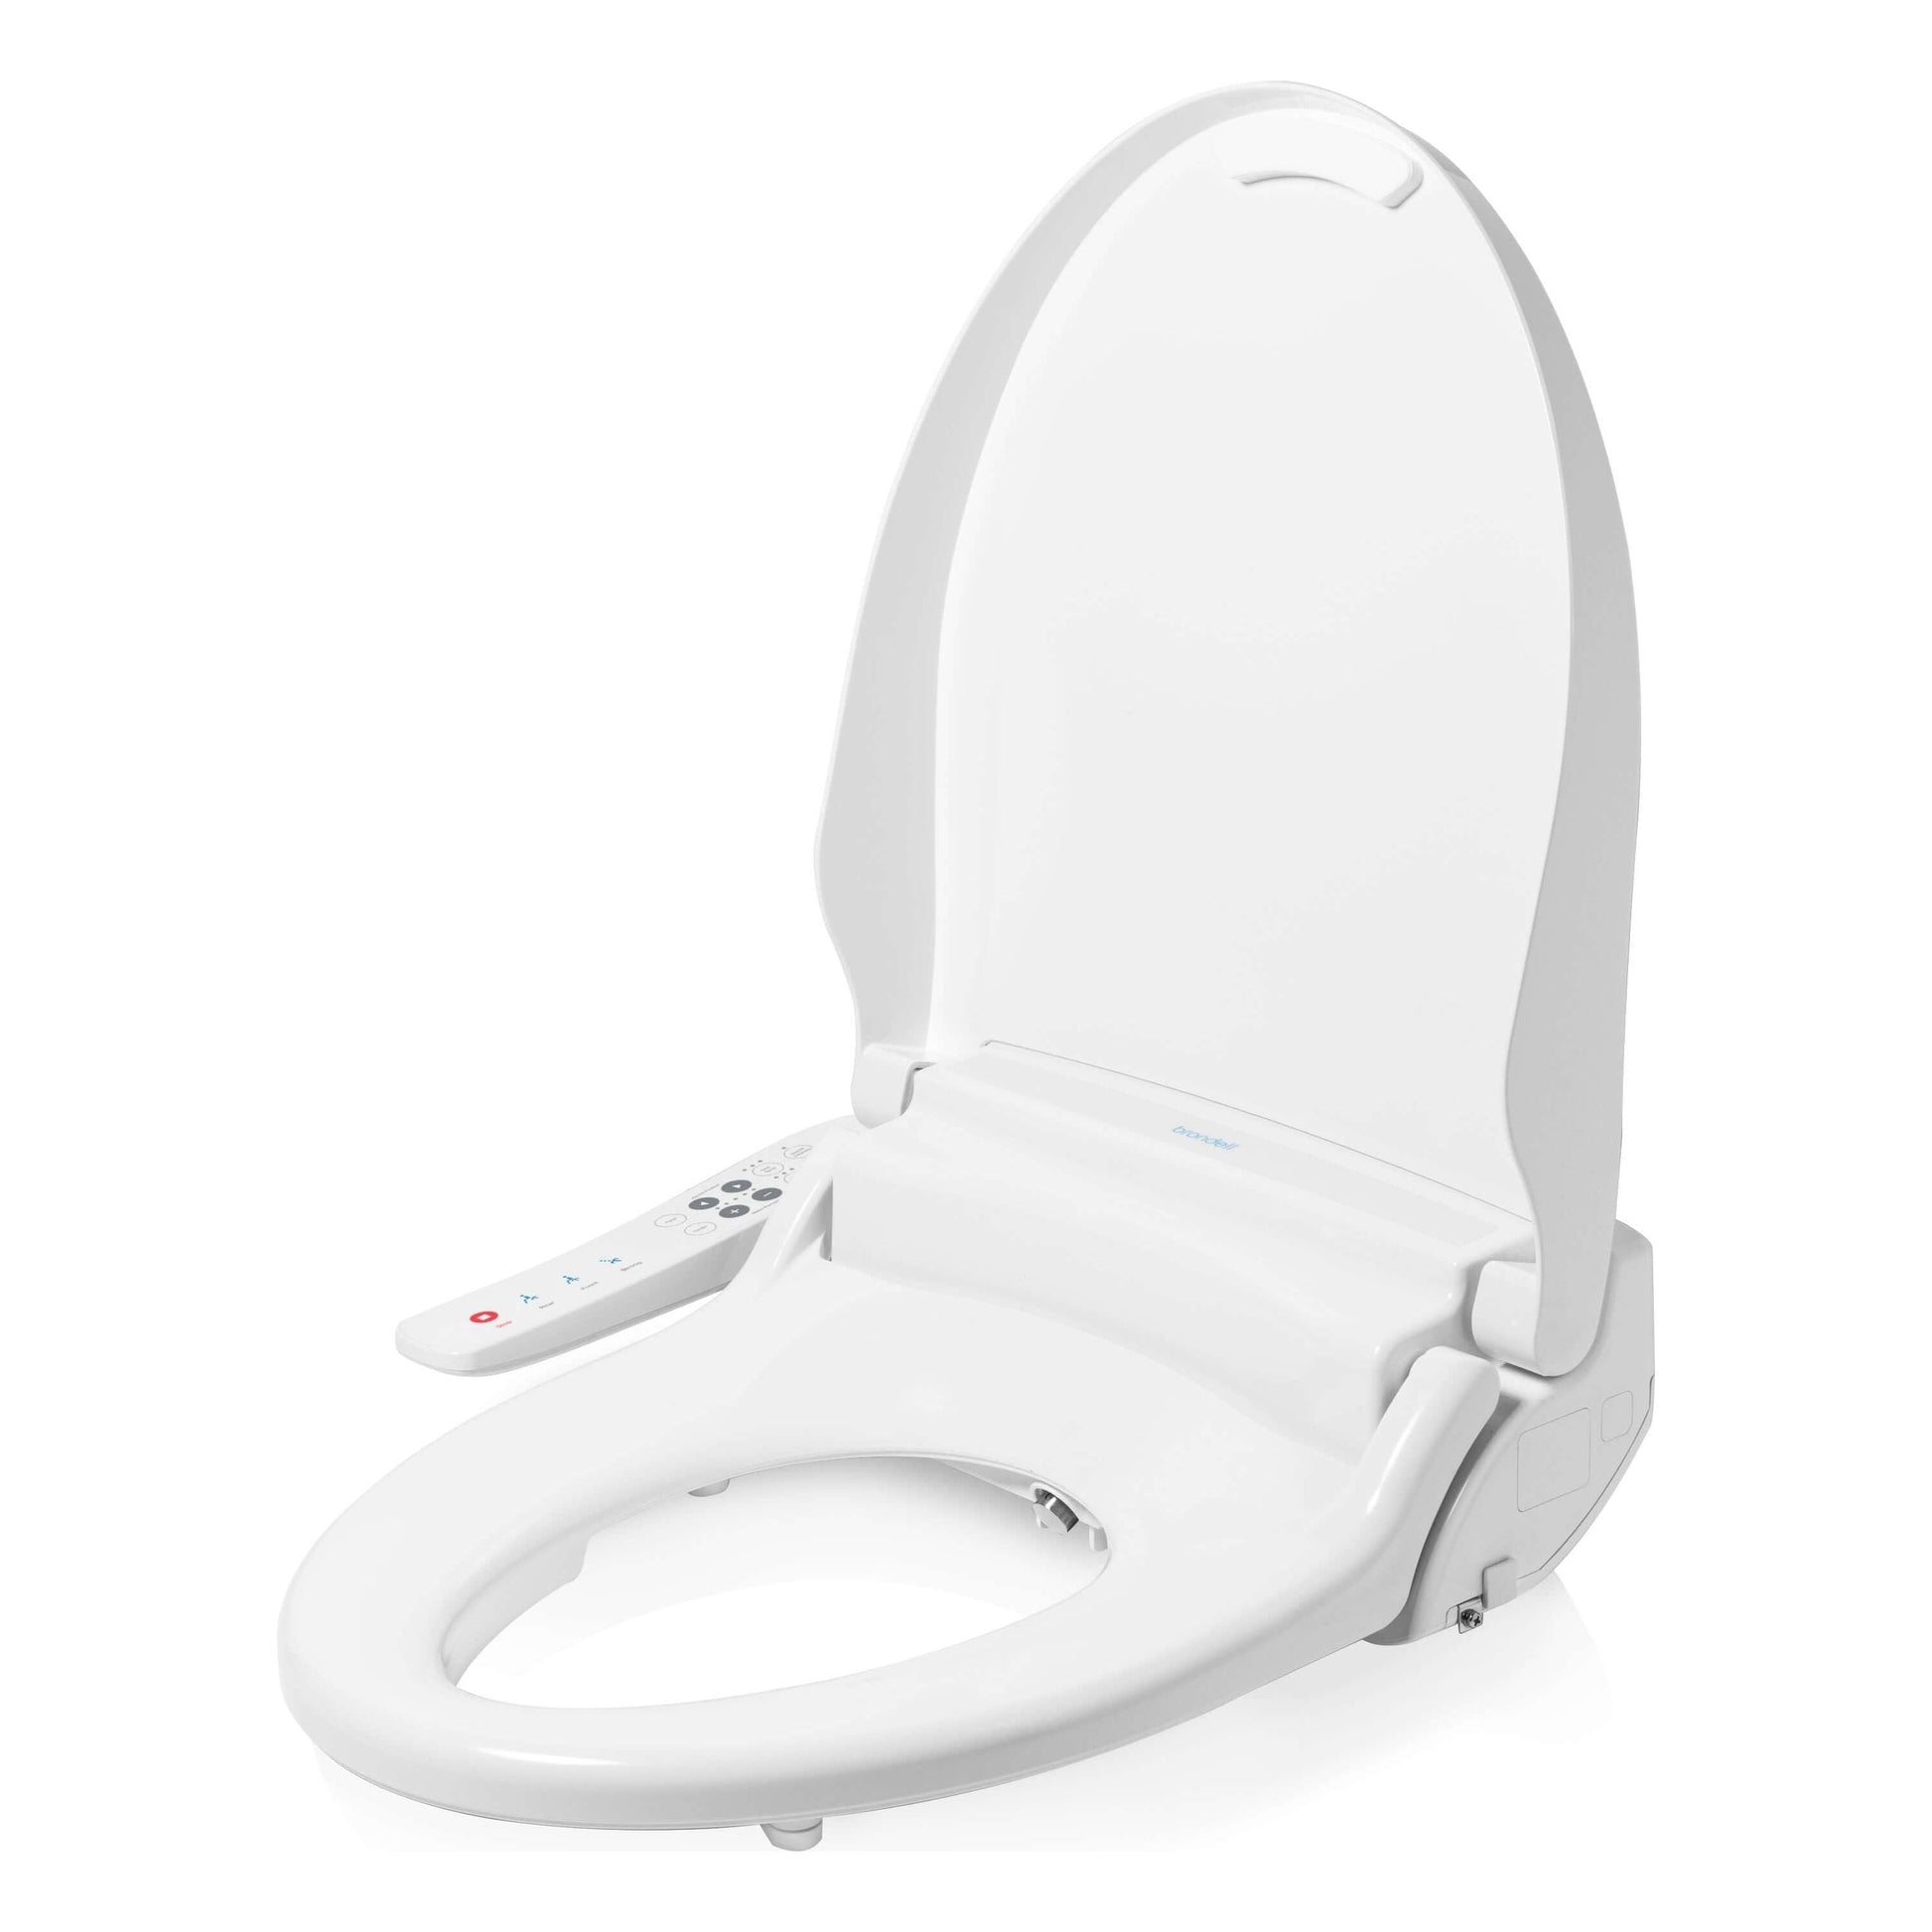 Swash Select BL67 Bidet Seat - side angled view with lid open